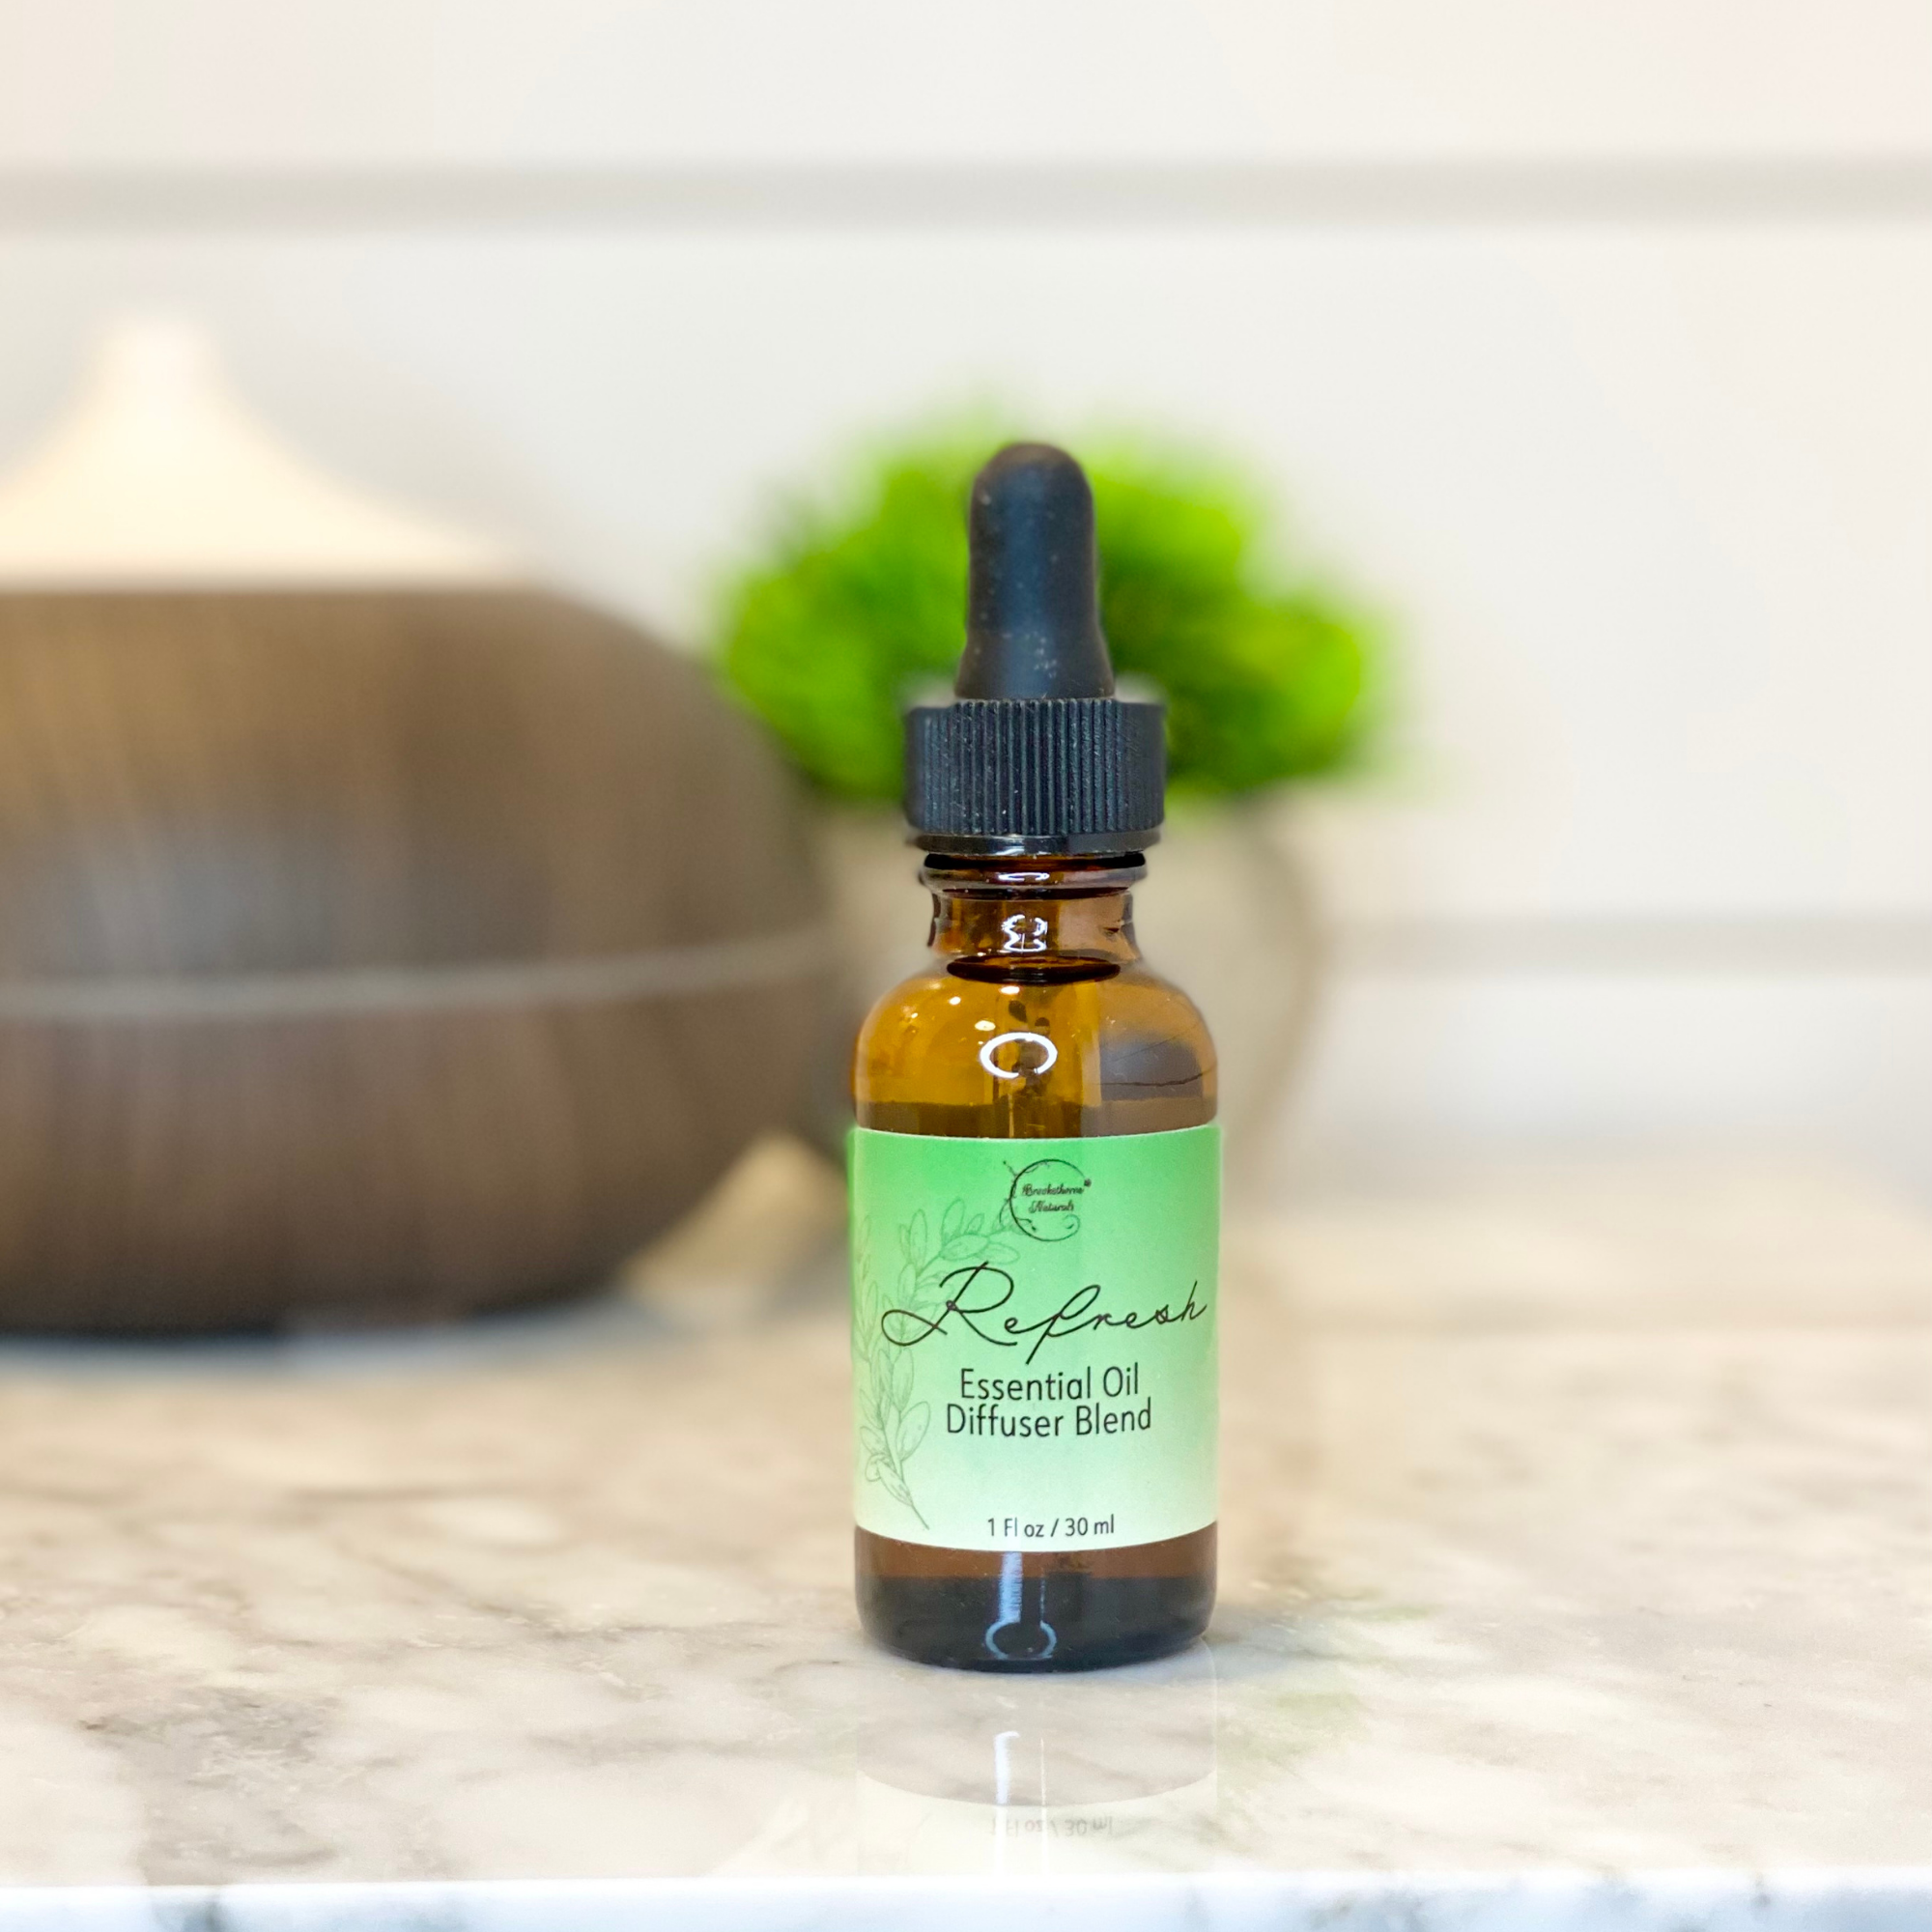 Can You Put CBD Oil In Your Aromatherapy Diffuser? 